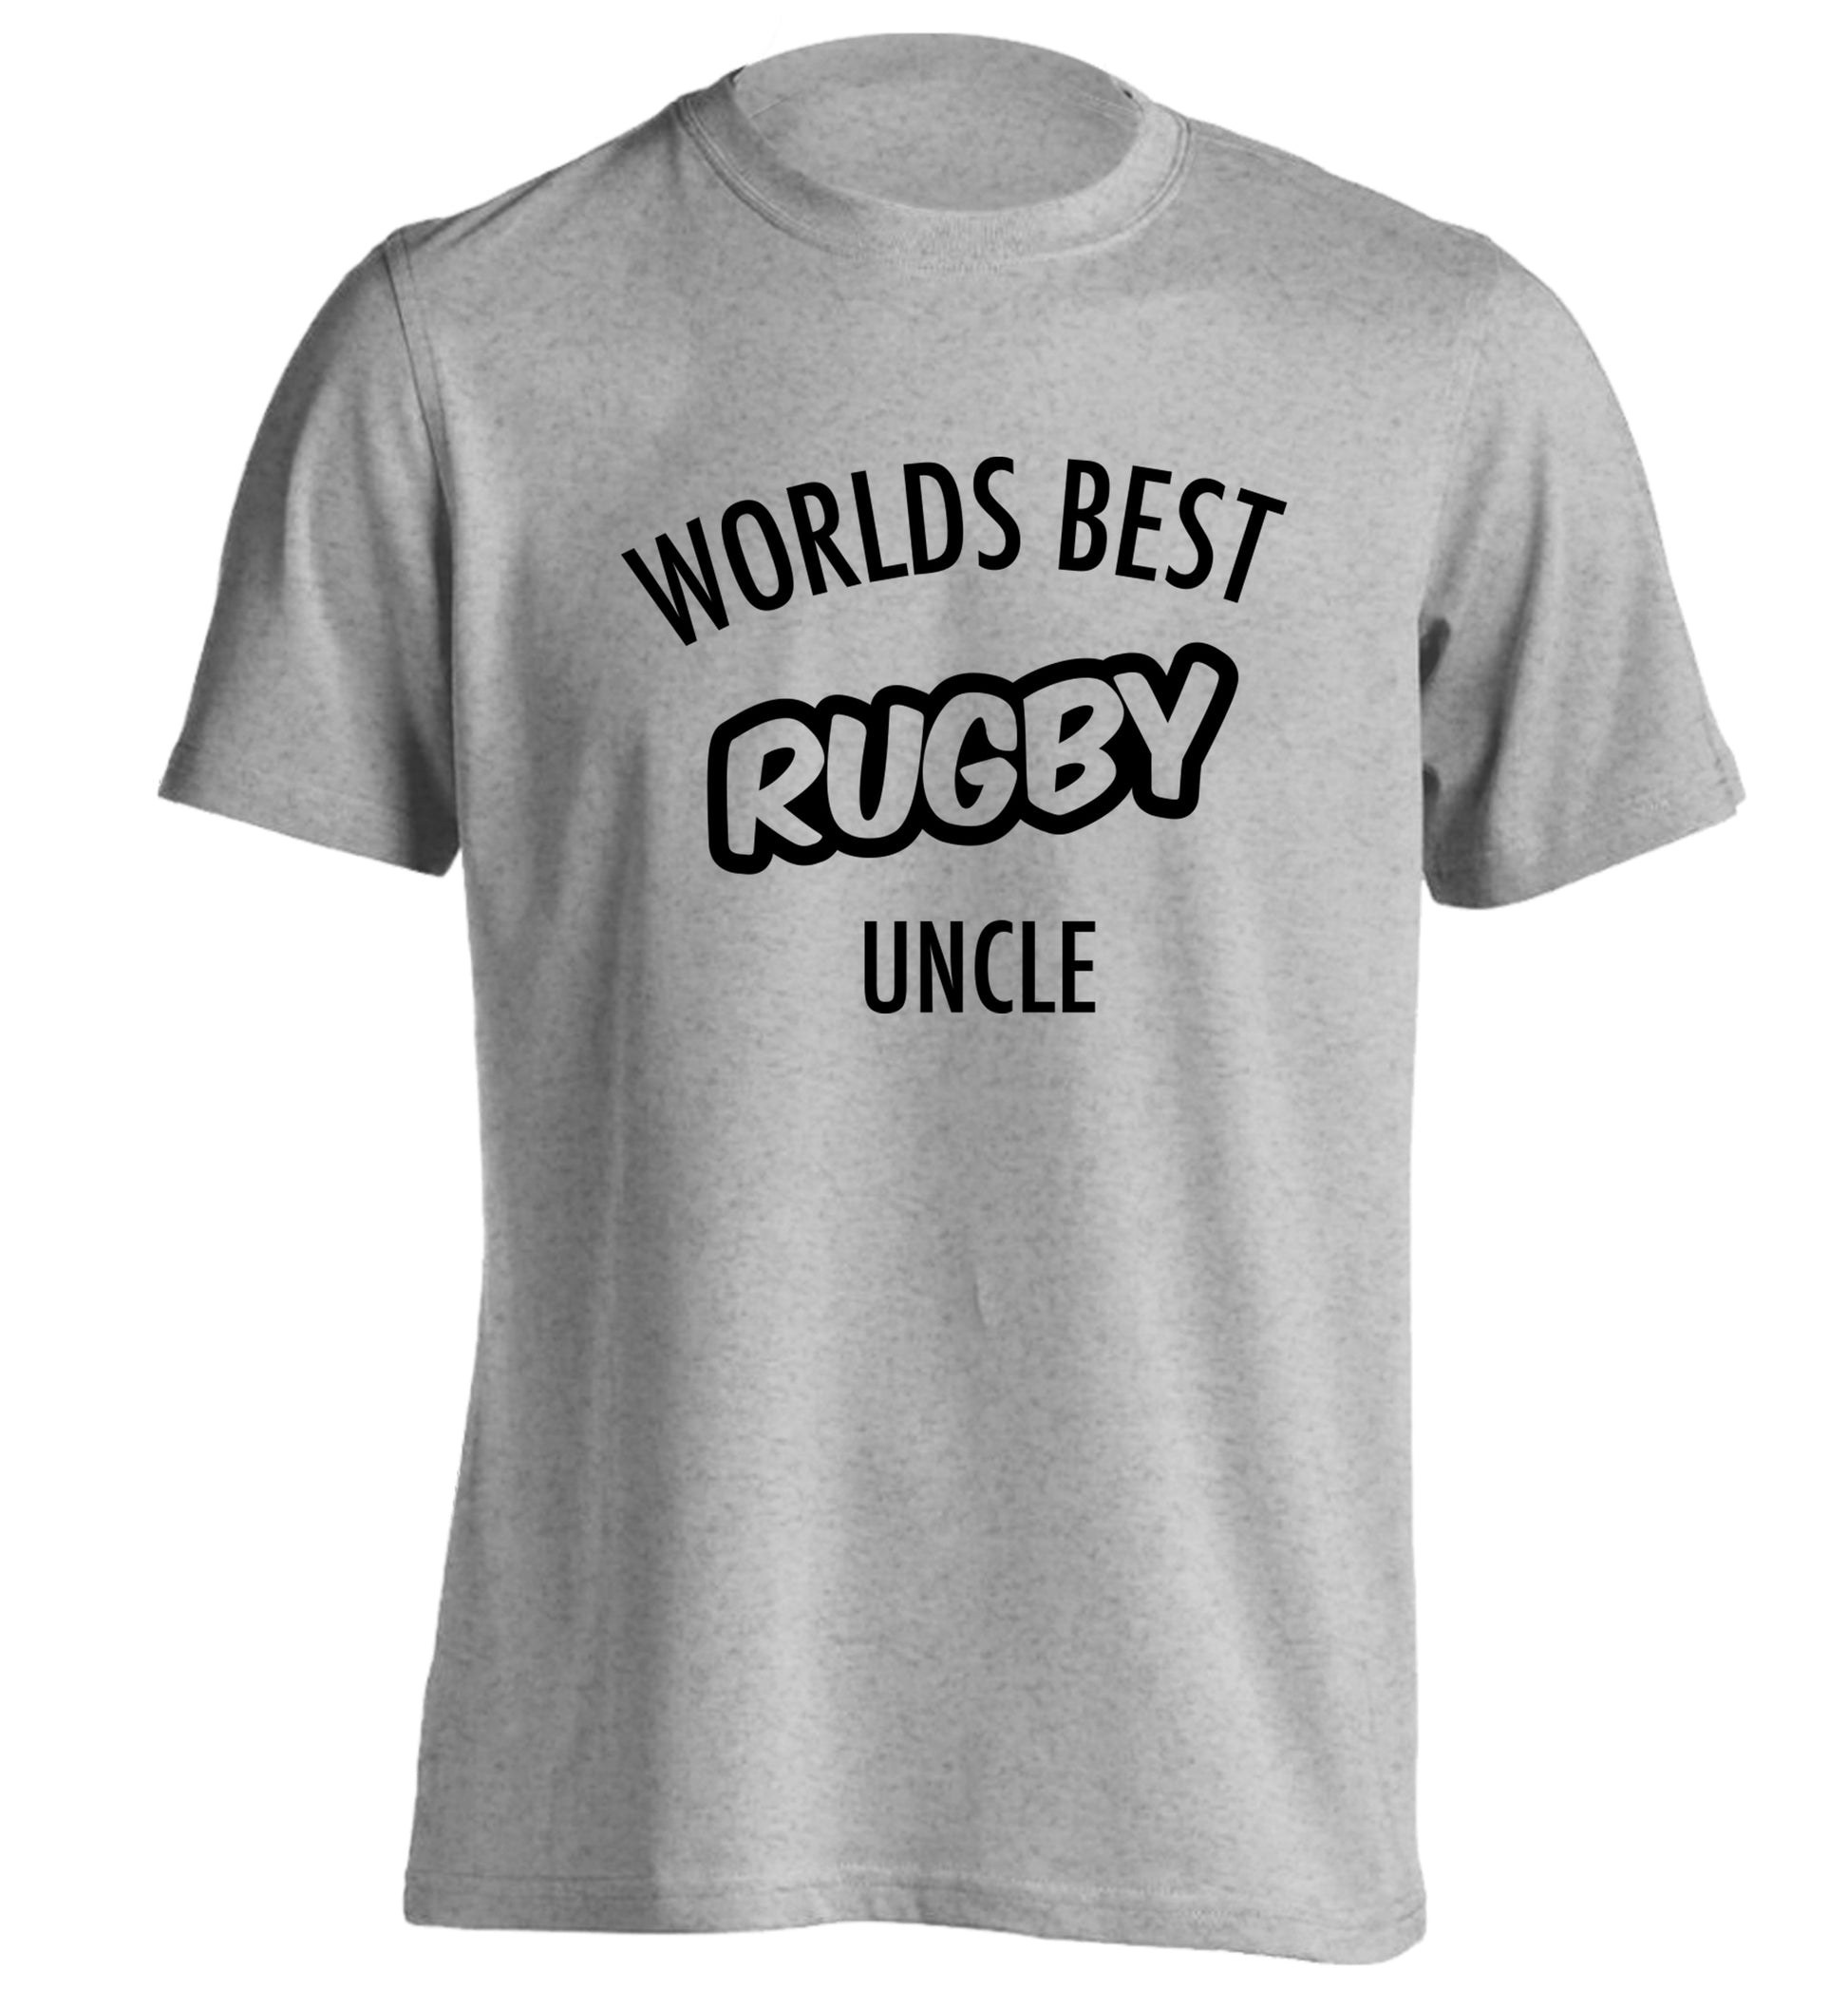 Worlds best rugby uncle adults unisex grey Tshirt 2XL